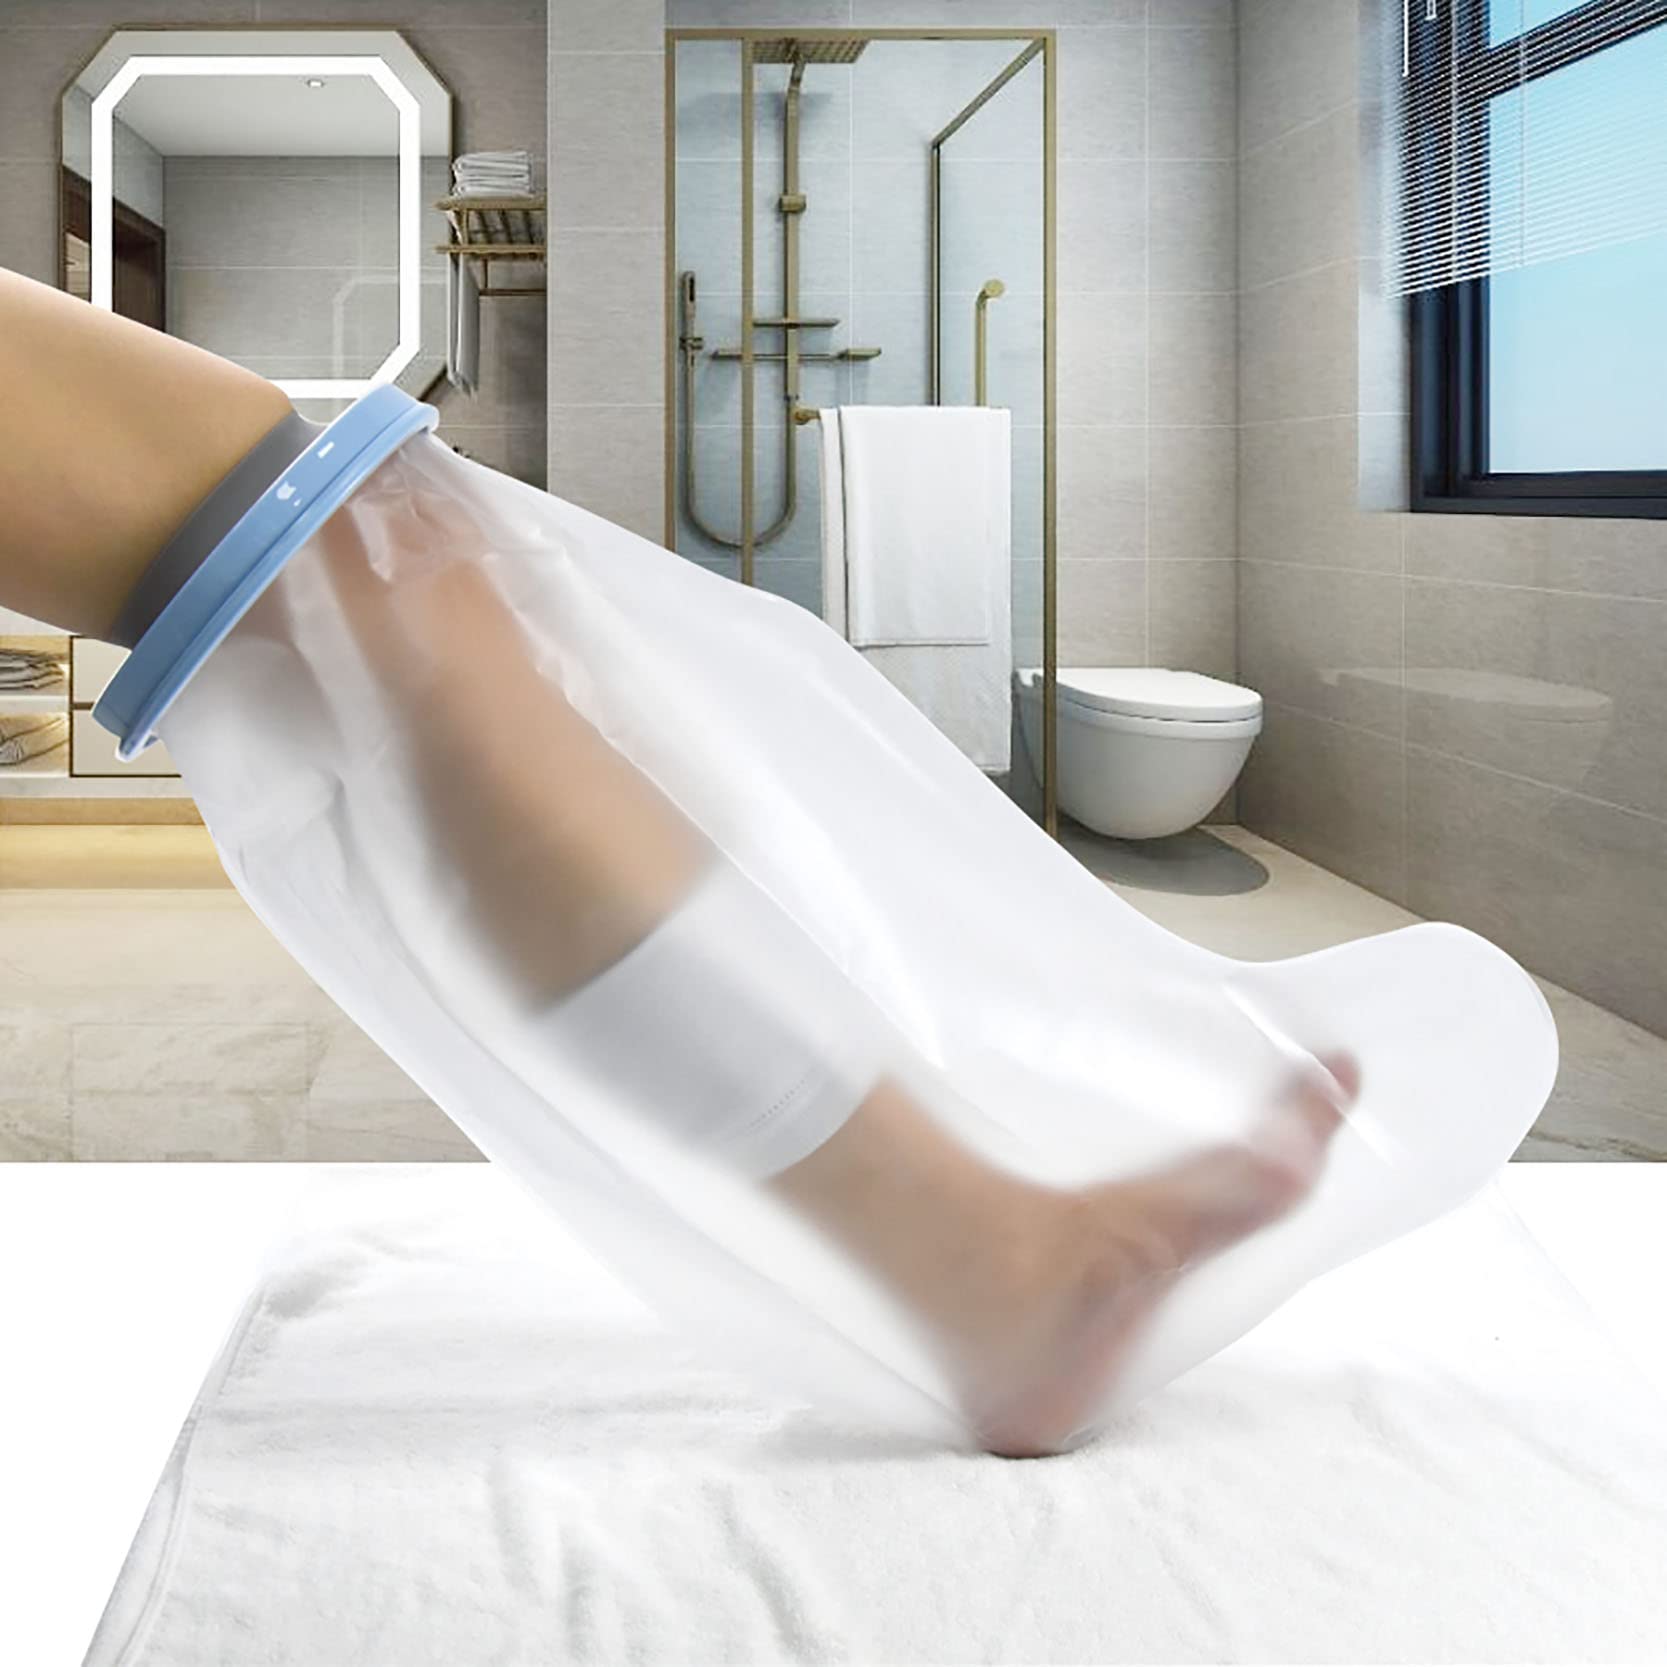 Cast Cover Waterproof Leg Adult for Shower, Reusable Bandage Cast Protector for Shower Bath, Watertight Seal Tight Leg Bathing Guard for Broken Leg, Knee, Foot, Ankle Wound, Burns